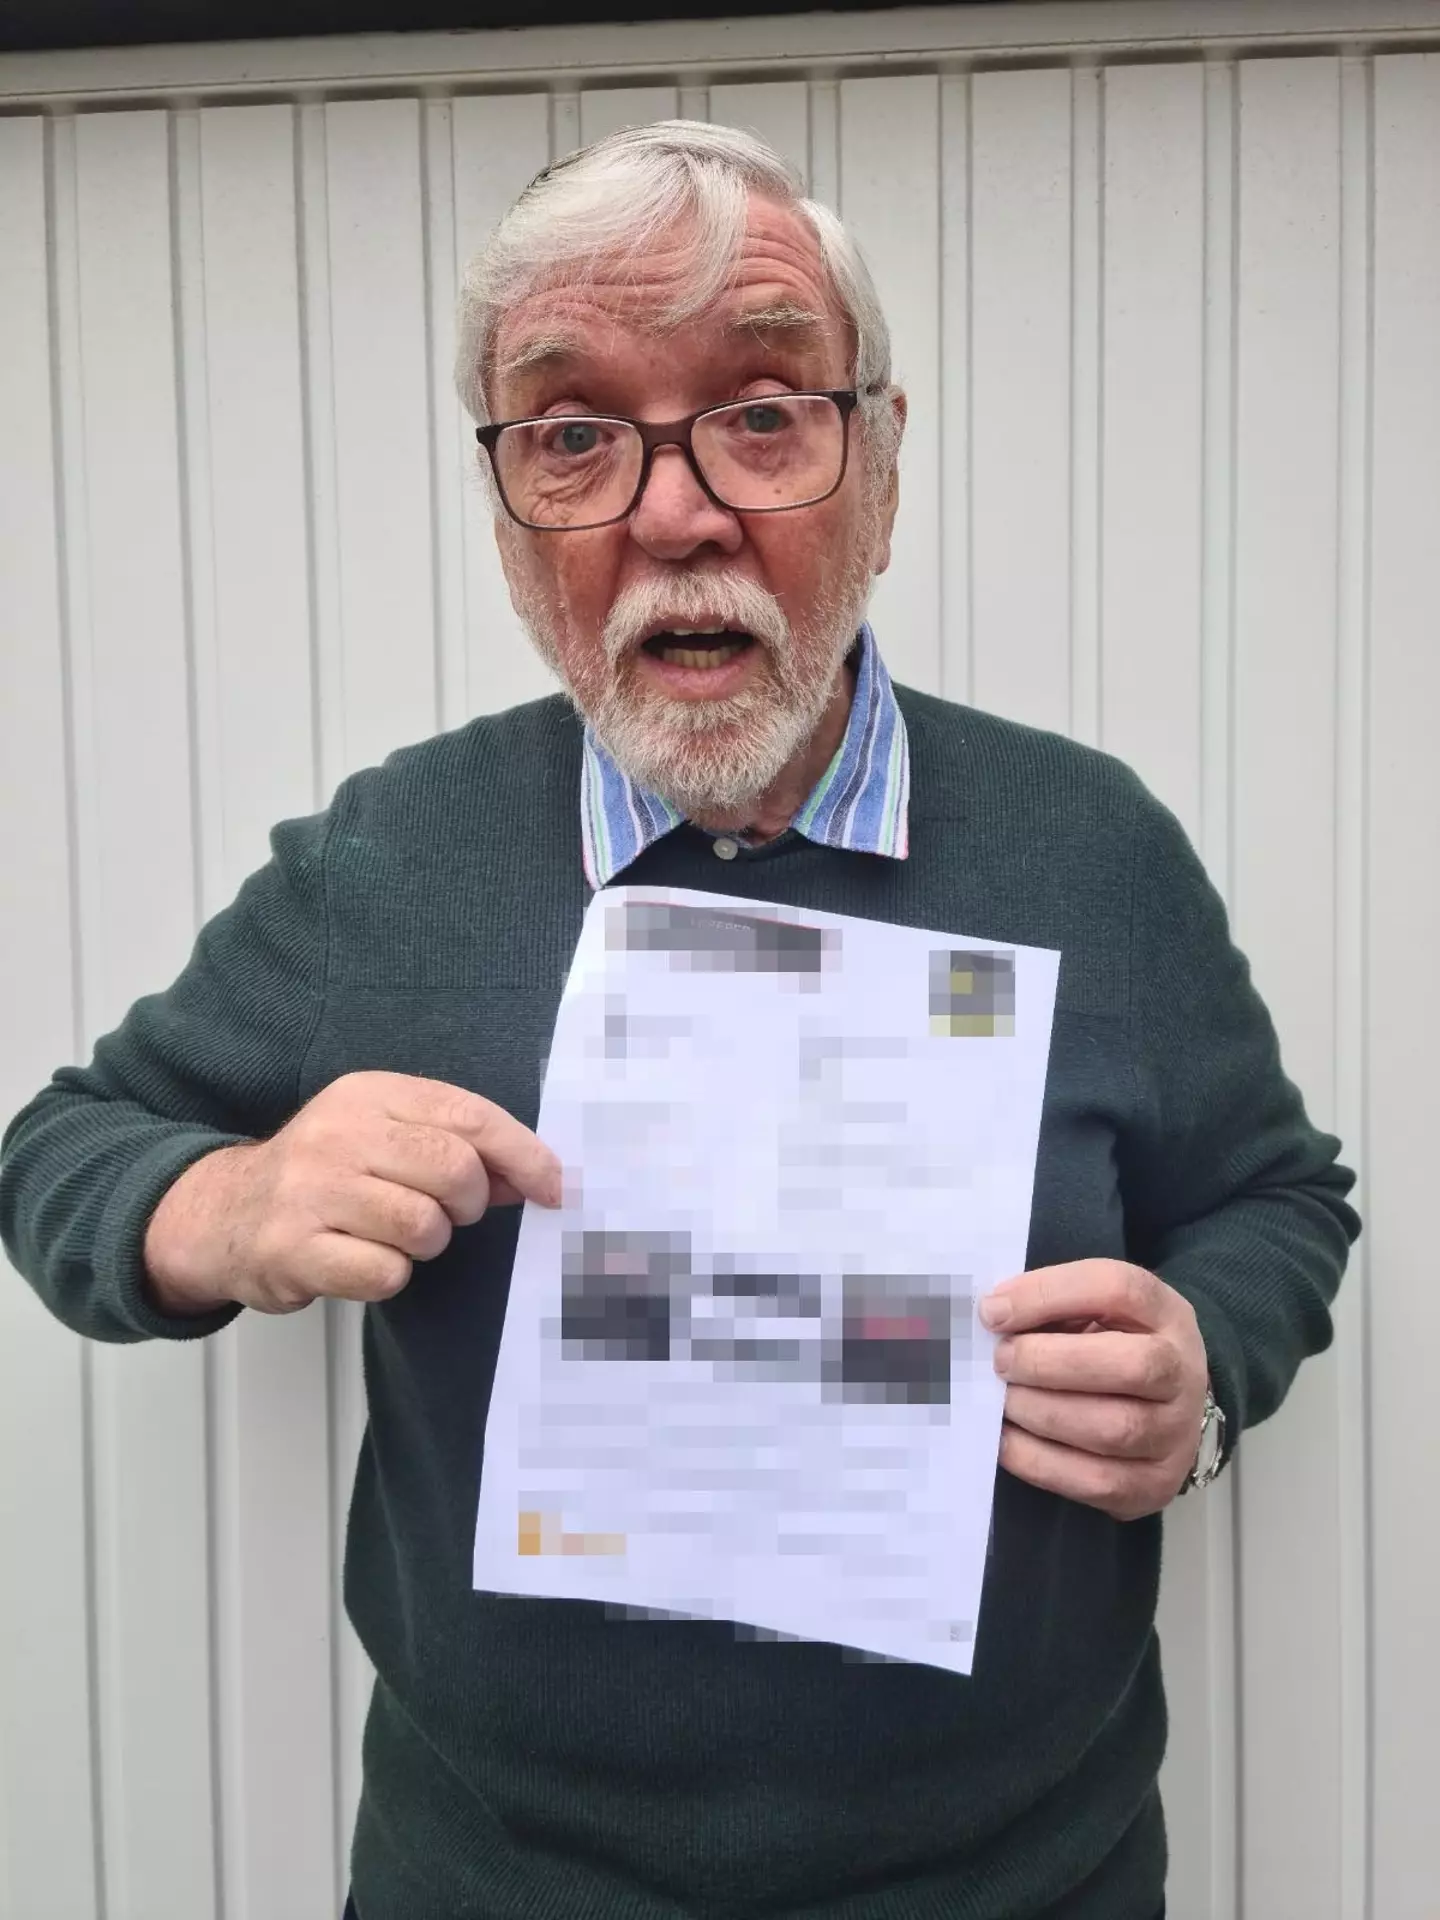 75-year-old Jamie Jamieson says he'd rather go to jail than pay the parking fine.